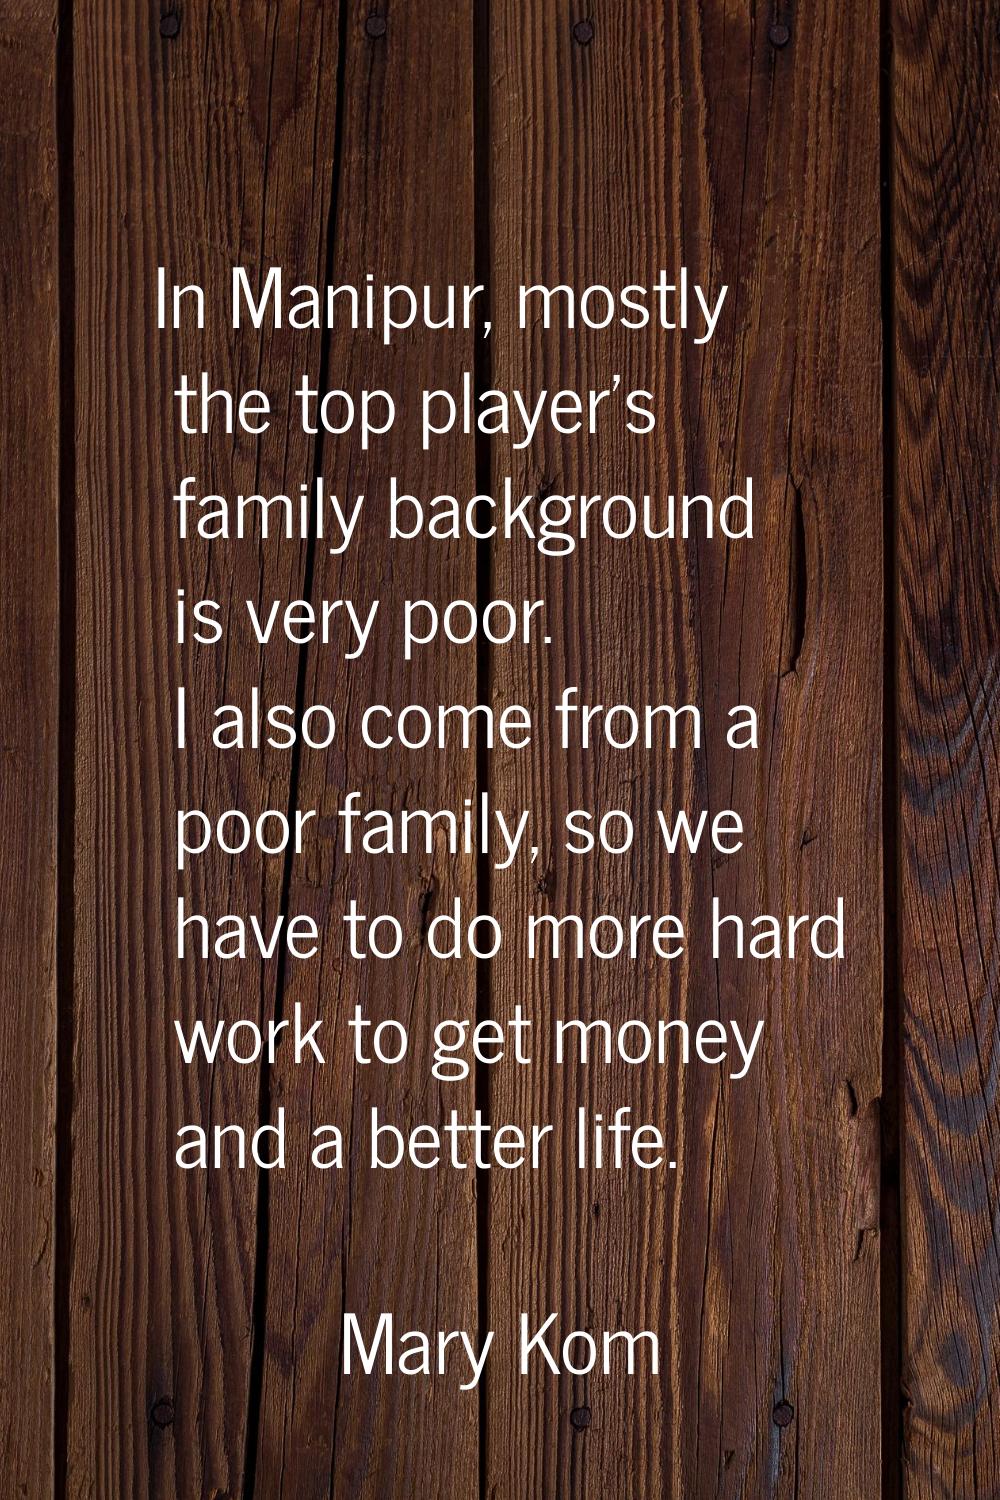 In Manipur, mostly the top player's family background is very poor. I also come from a poor family,